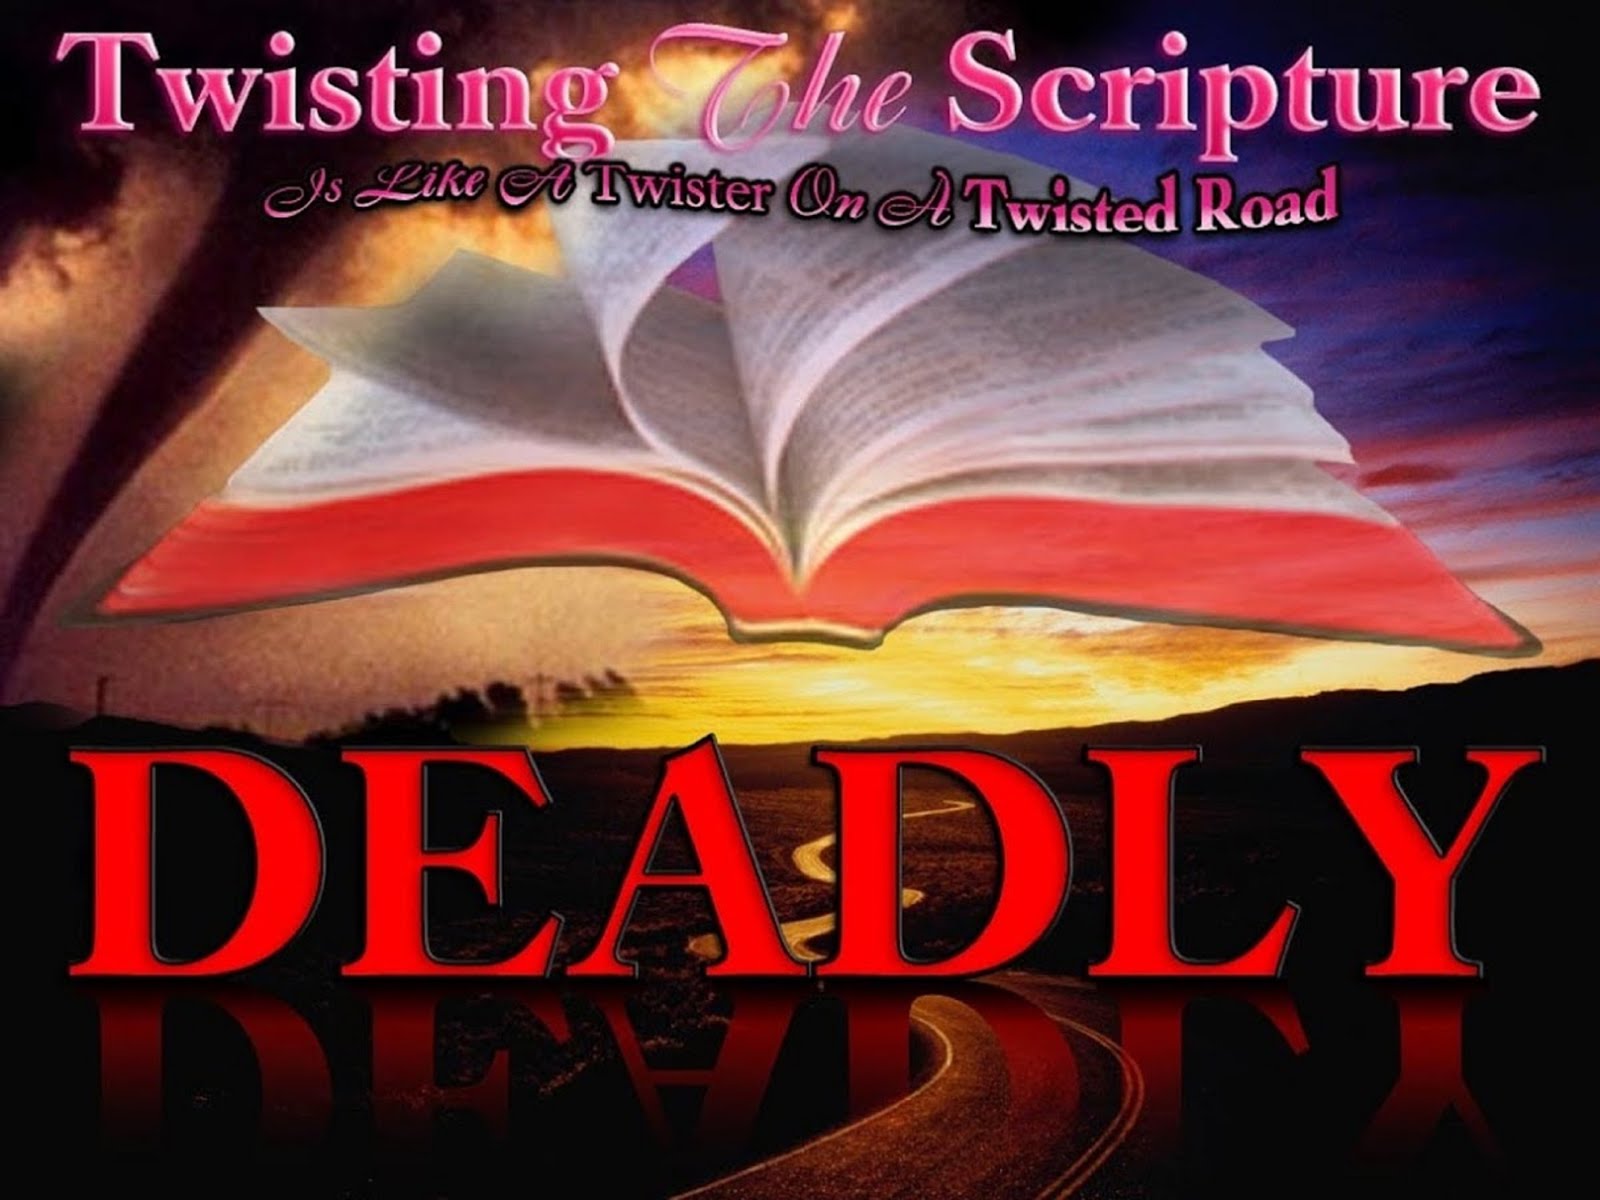 TWISTING SCRIPTURE CAN BE VERY DEADLY